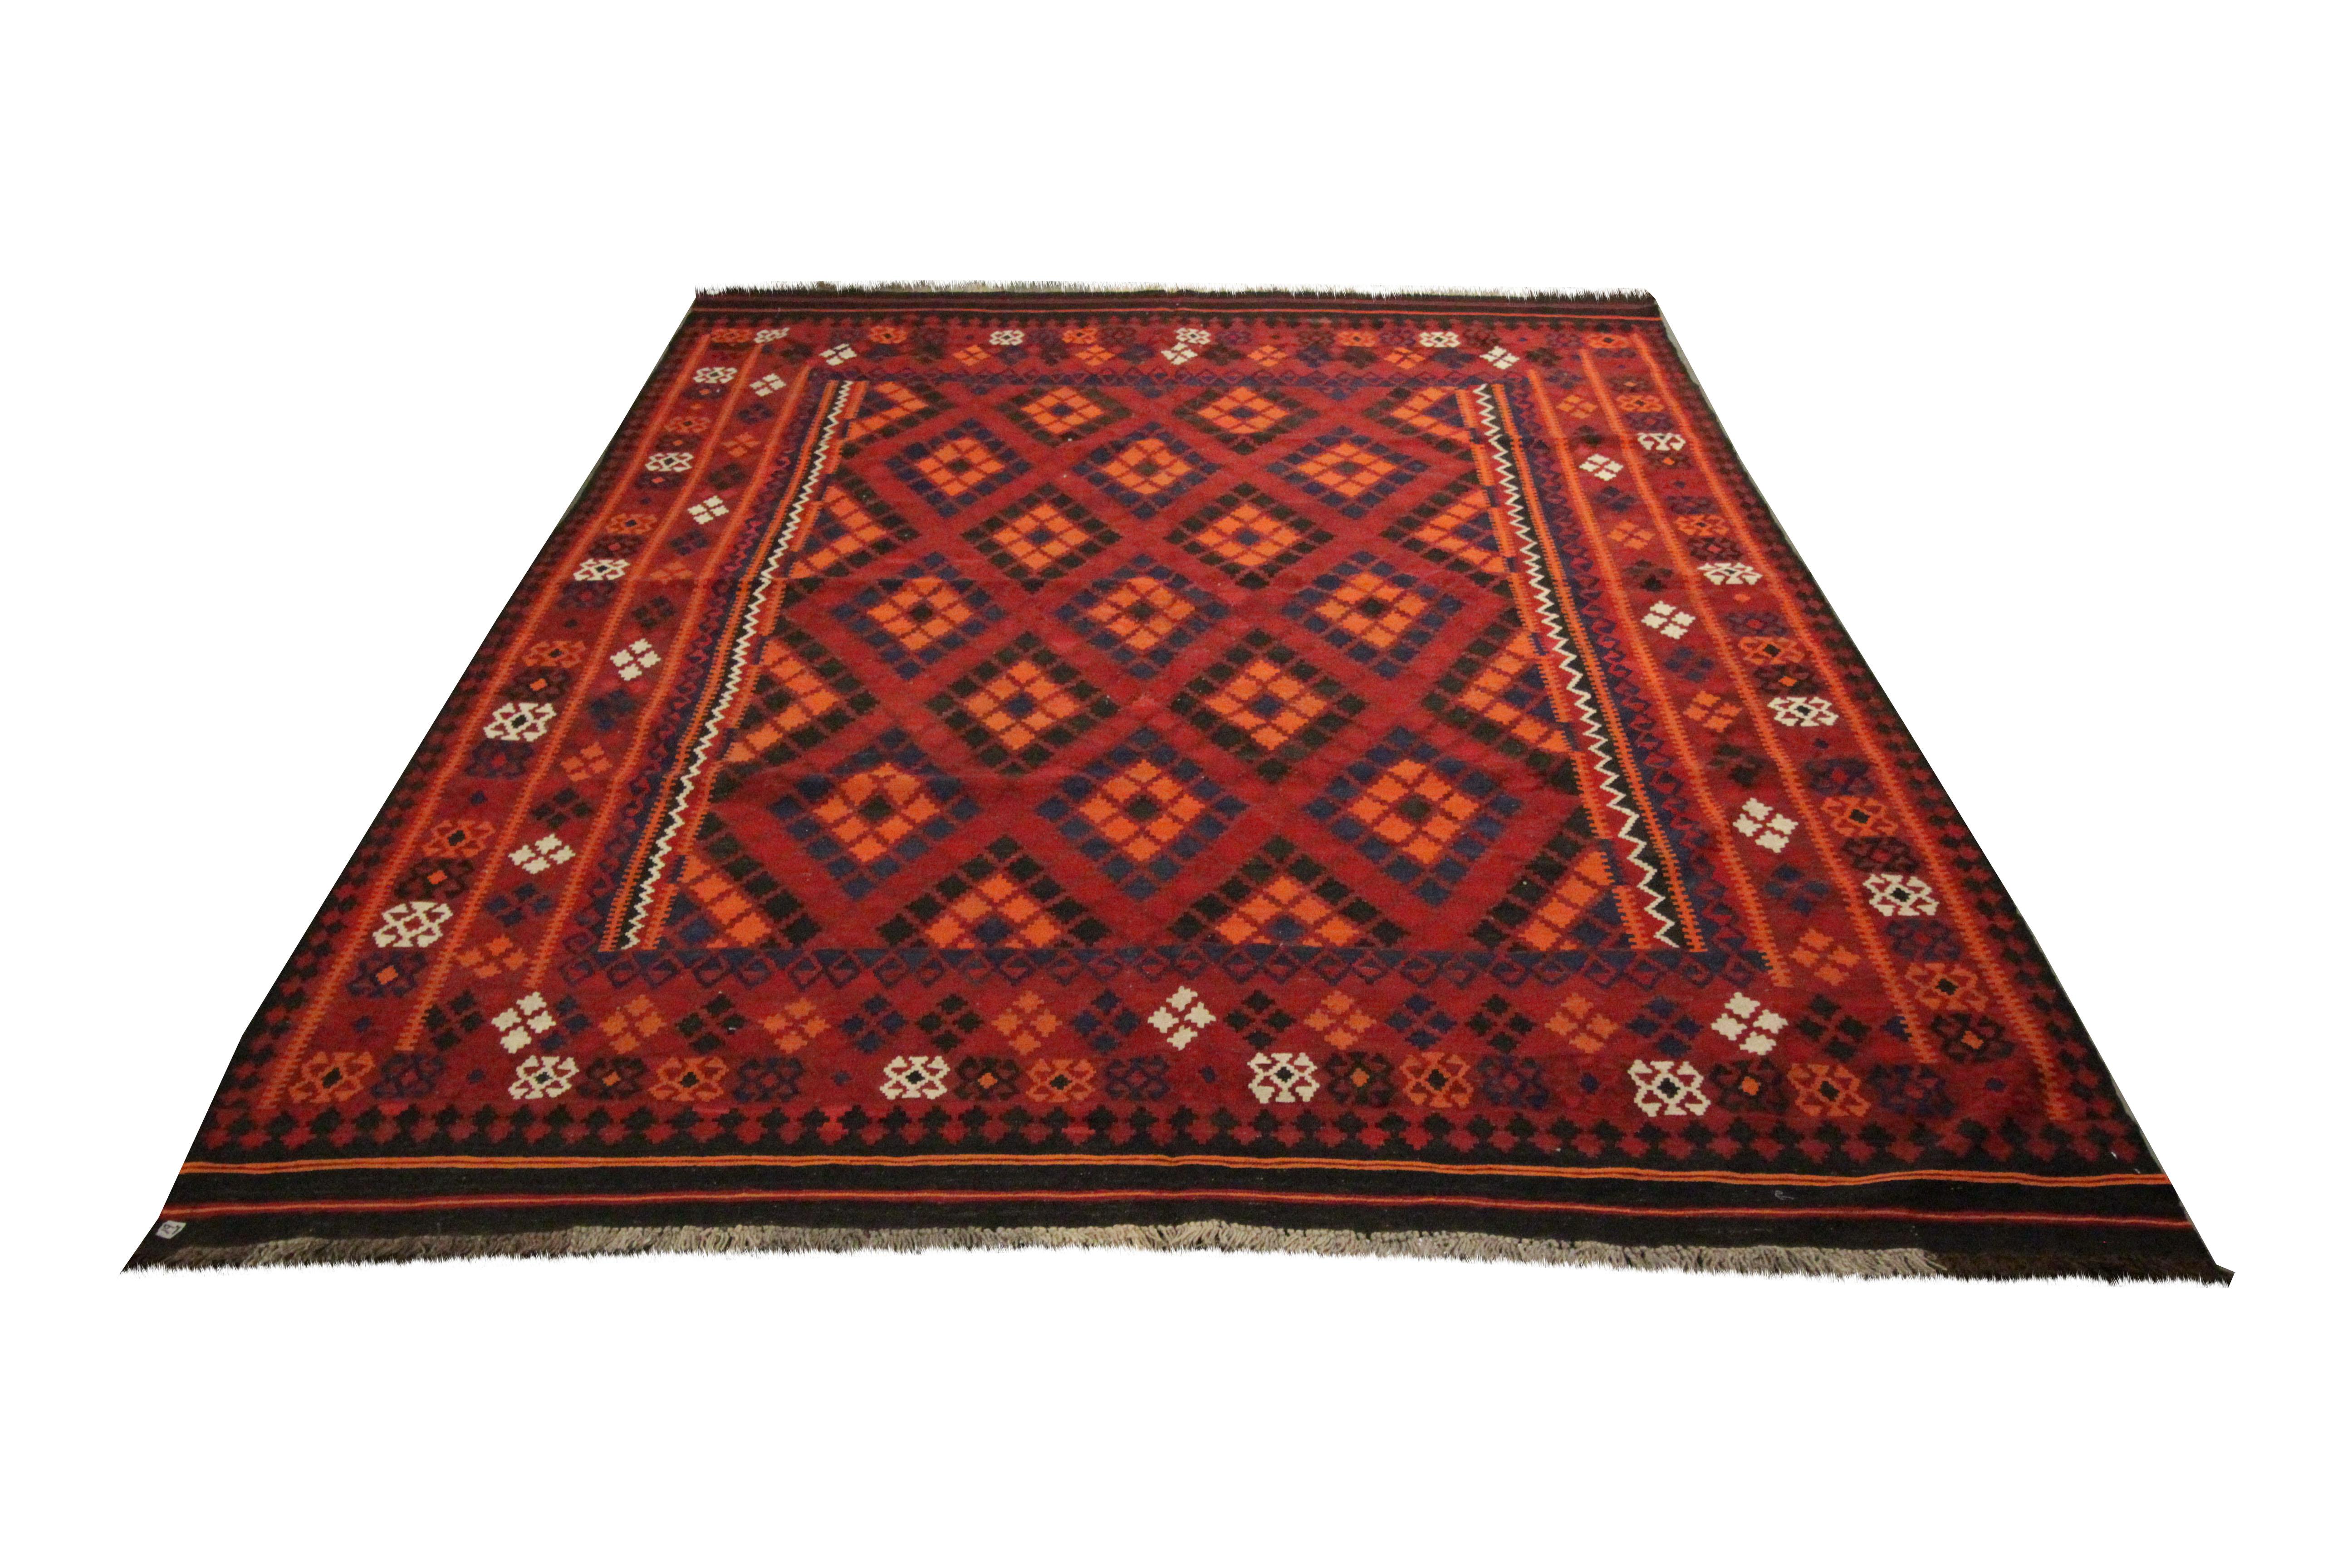 A bold geometric design has been woven in this fine wool kilim rug. It features a bold colour palette with accents of red, orange and blue. The design, pattern and colours in this piece make it sure to uplift any home interior. Easily style this